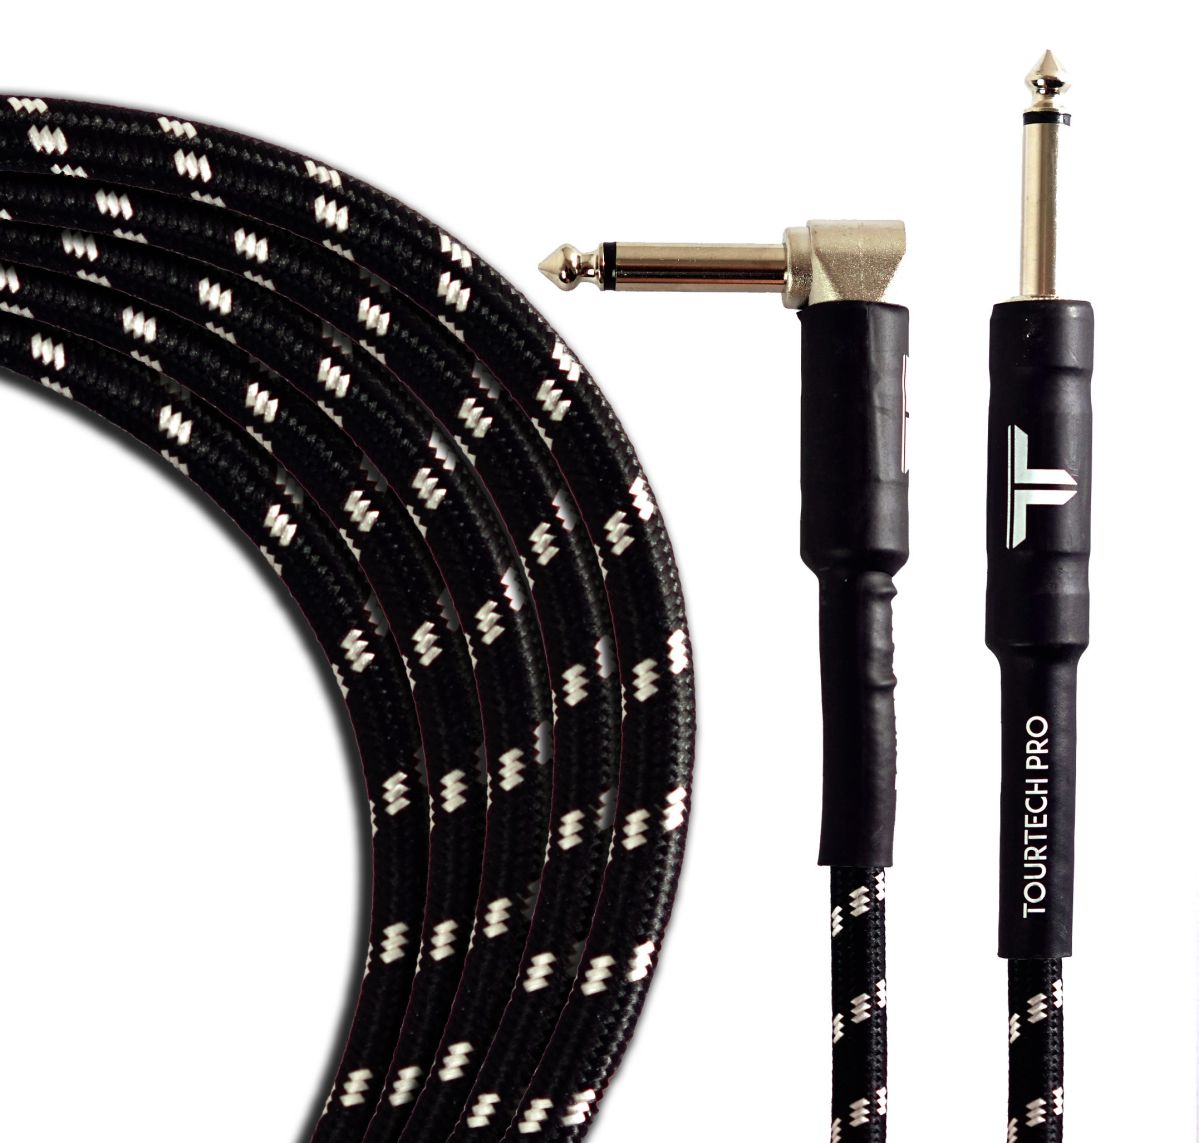 An image of TOURTECH Pro Angled Guitar Cable, 3m, Black & Grey - Gift for a Guitarist | PMT ...